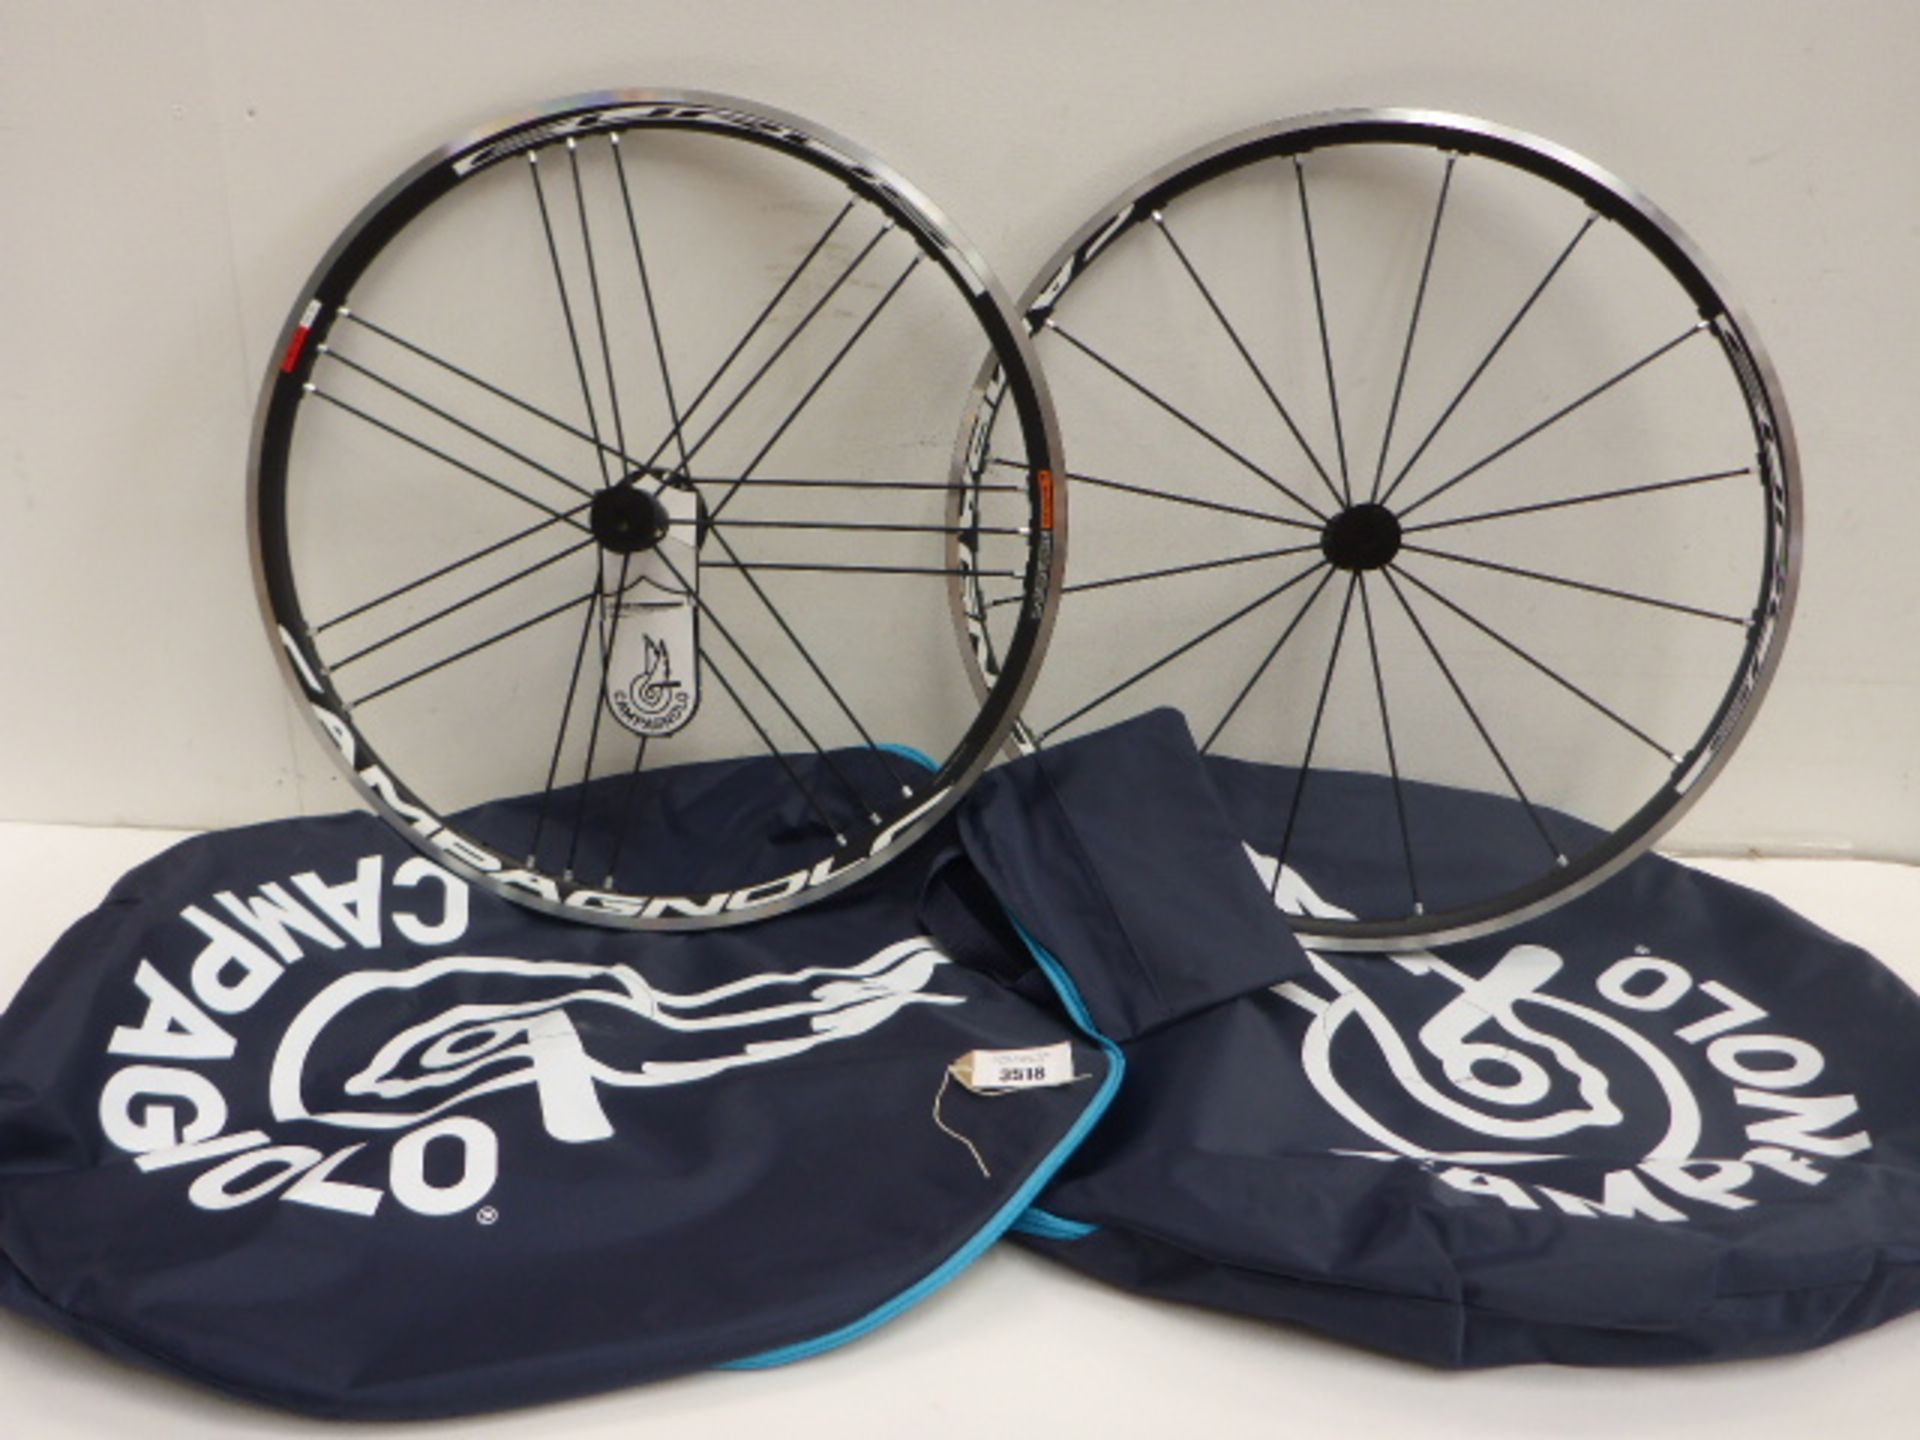 2 Campagnolo Eurus bike wheels and protective zip up carry cases